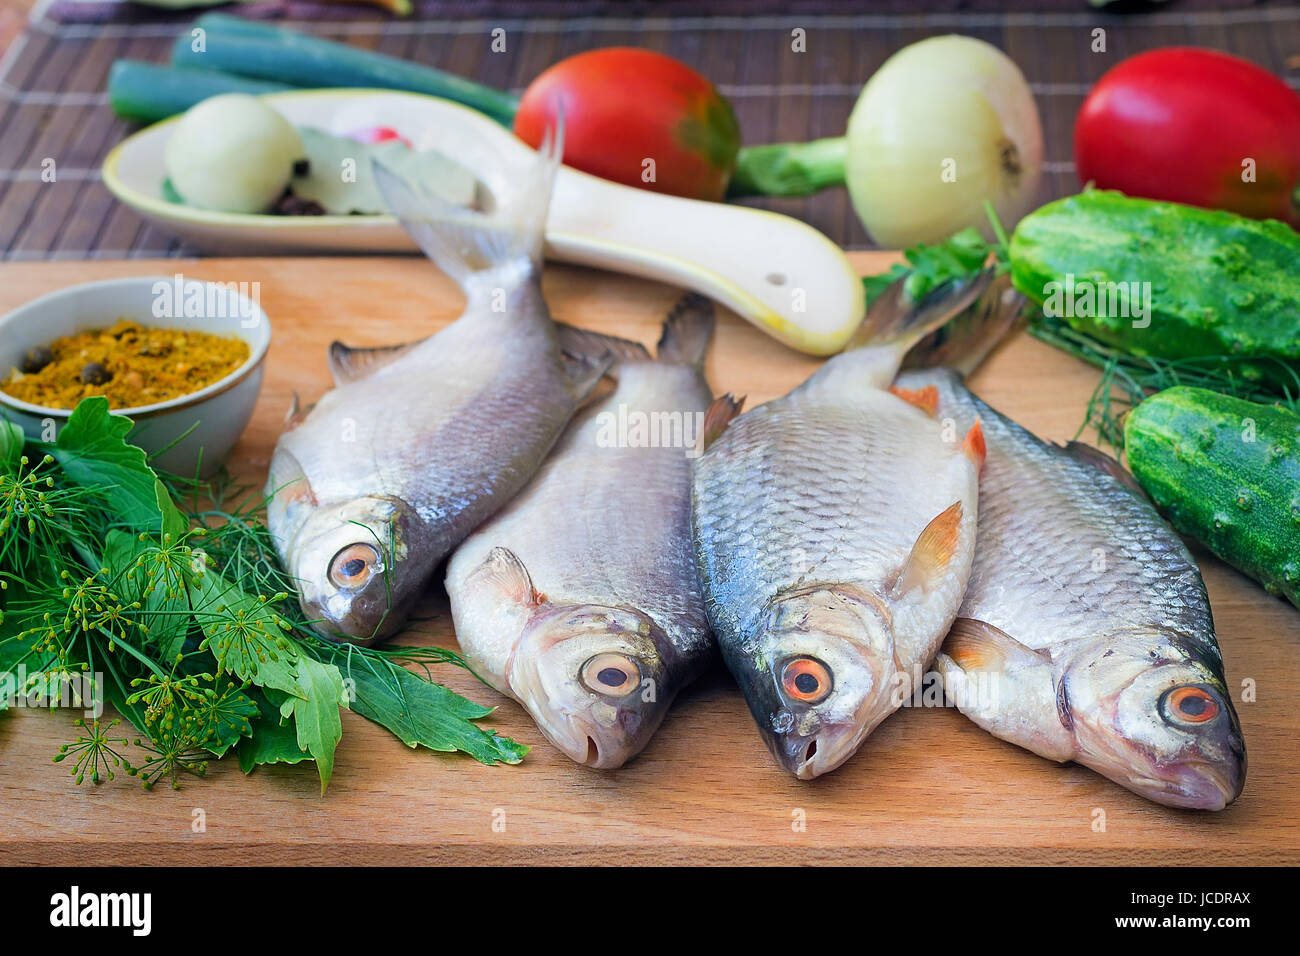 On a table on a chopping board there are a fish, cucumbers, tomatoes, onions, spices and parsley greens. Stock Photo